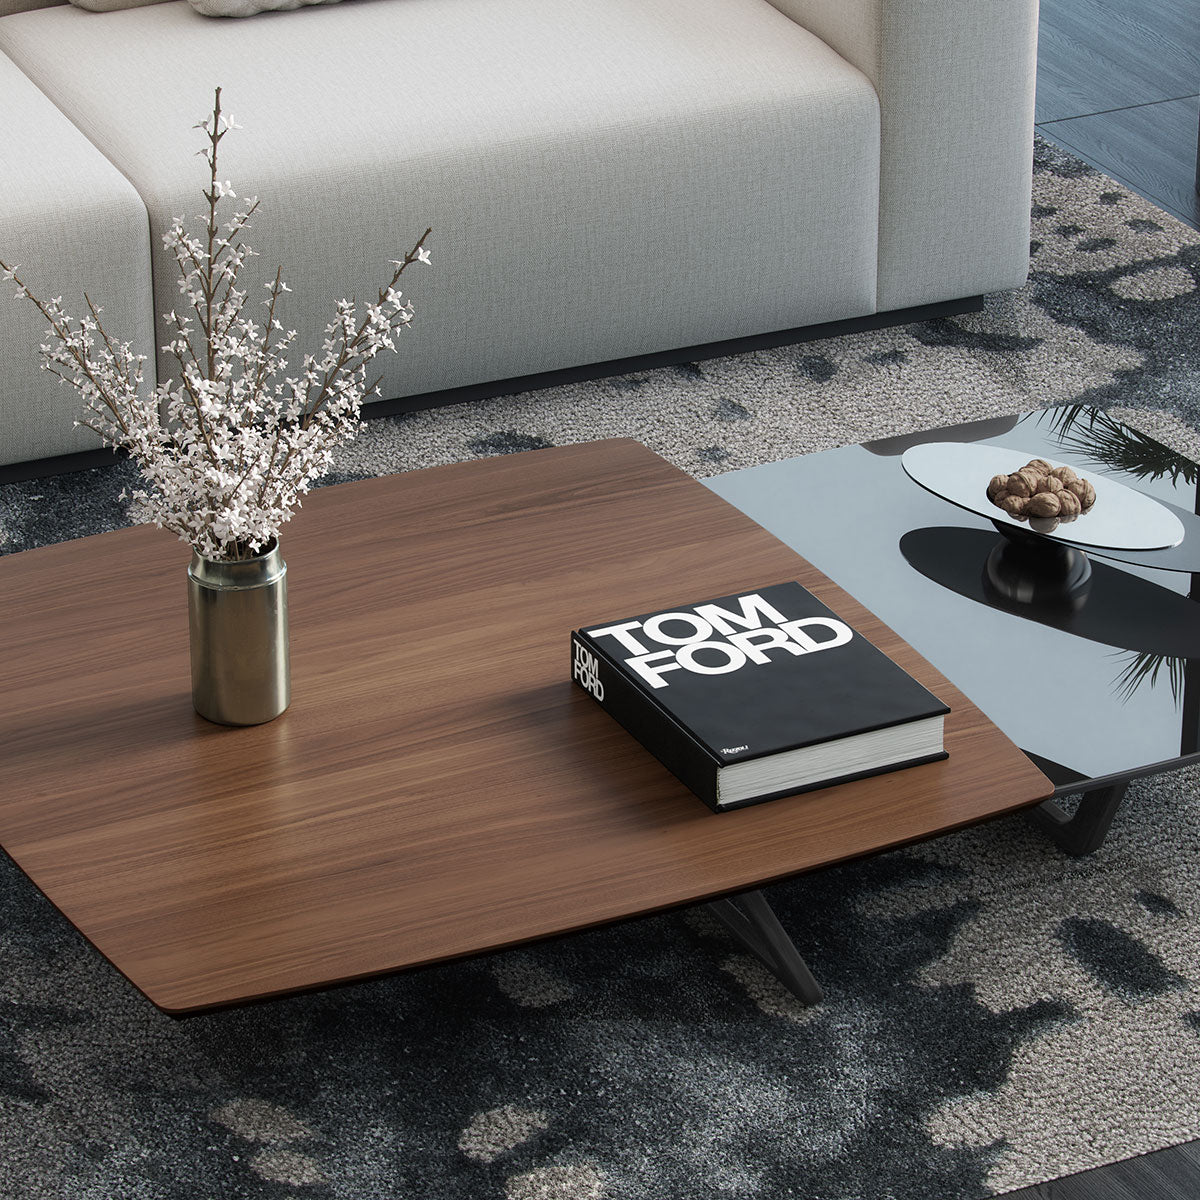 How to Choose and Style Coffee Table Books Like a Pro